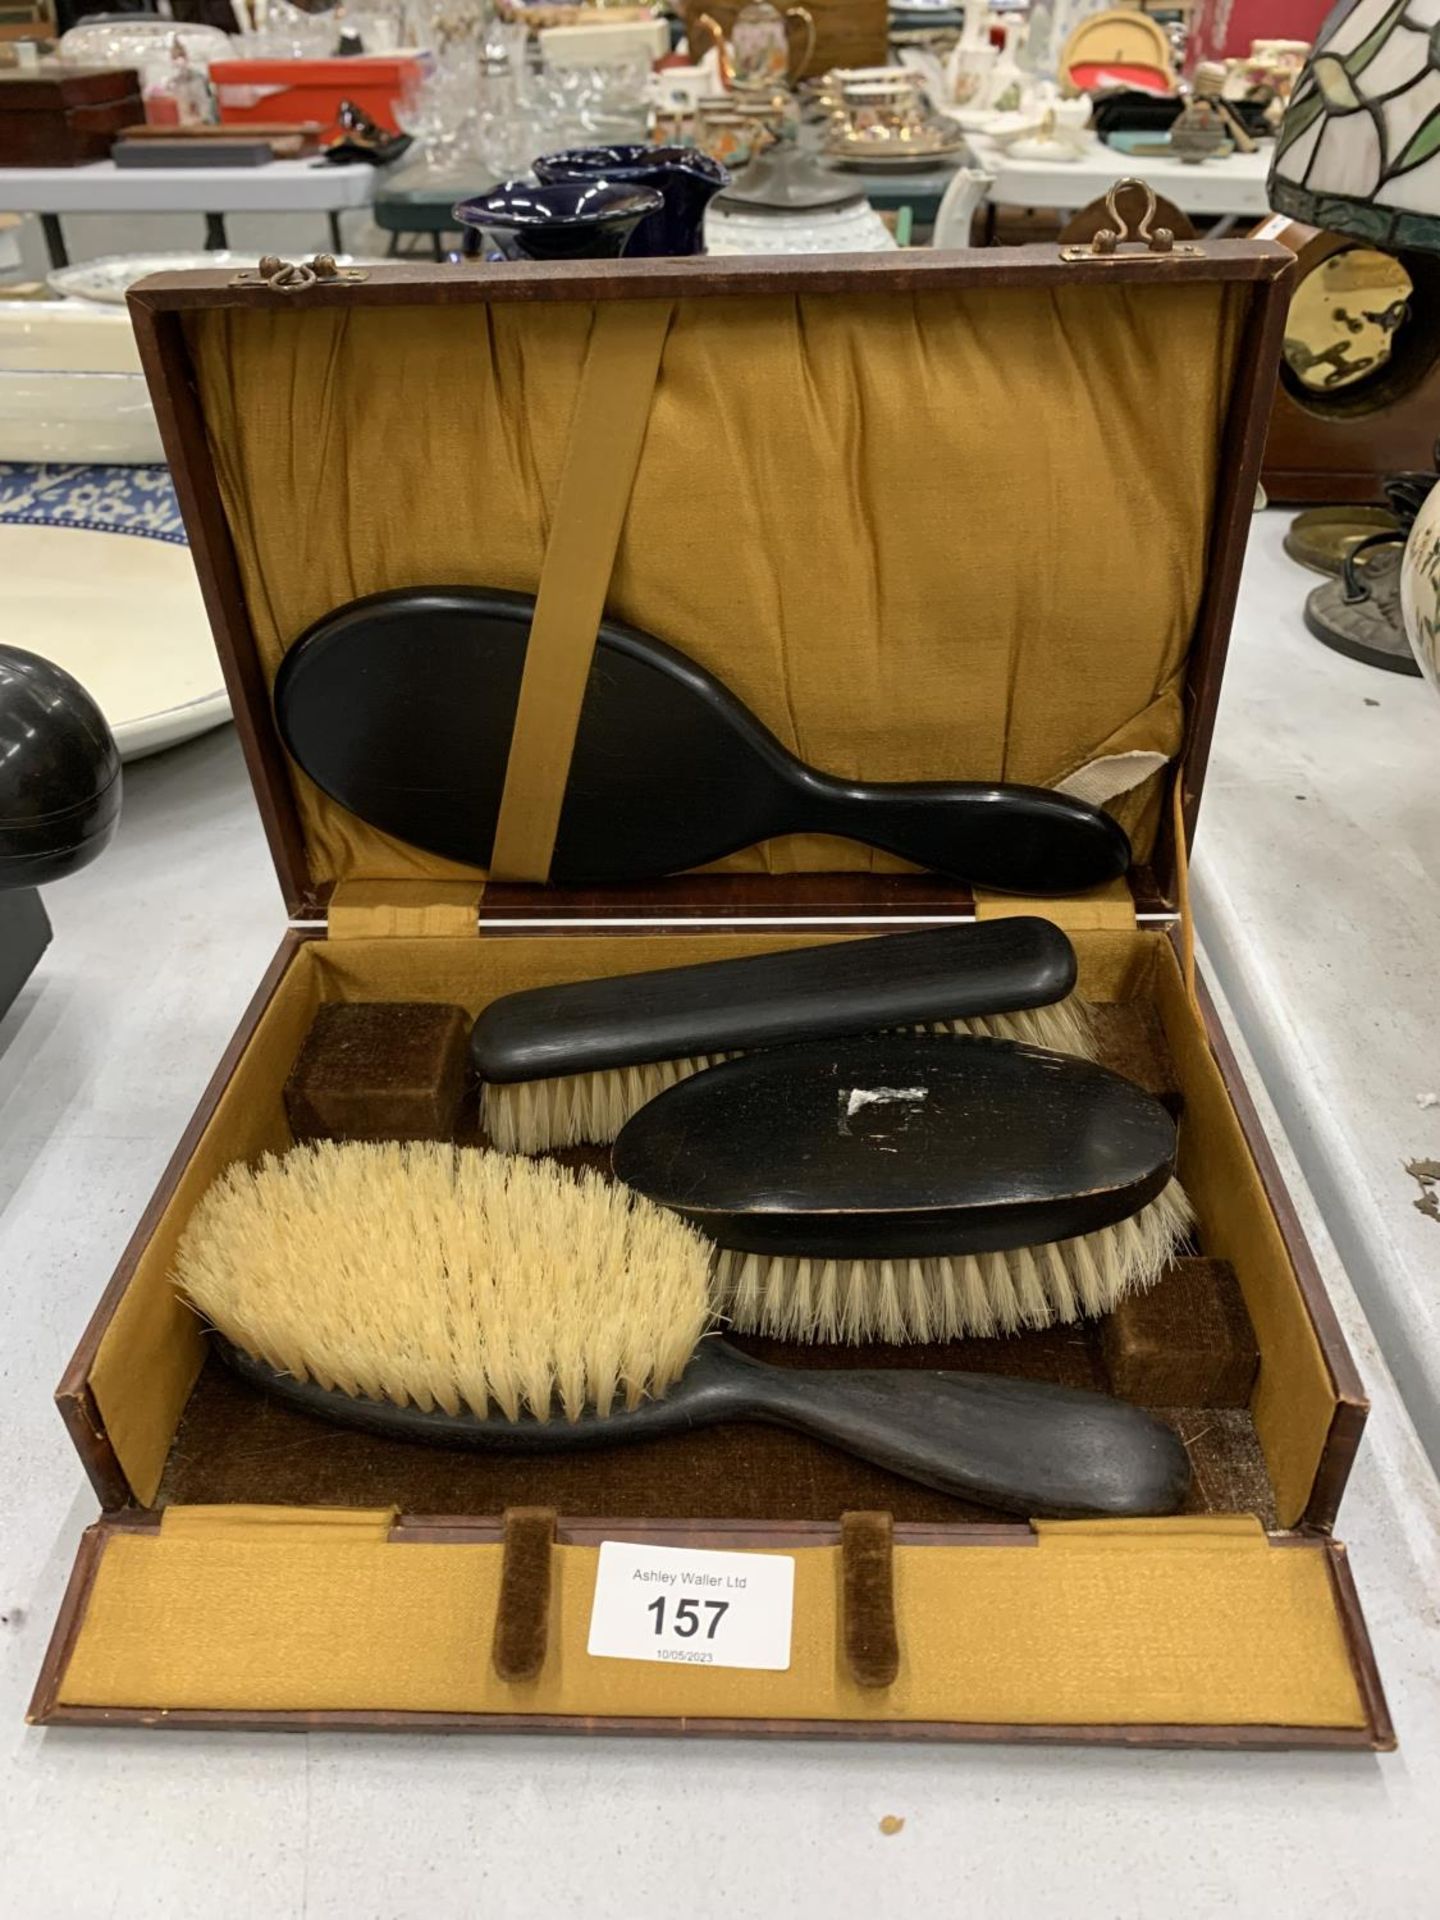 A GROOMING SET CONSISTING OF BRUSHES AND A MIRROR IN A CASE